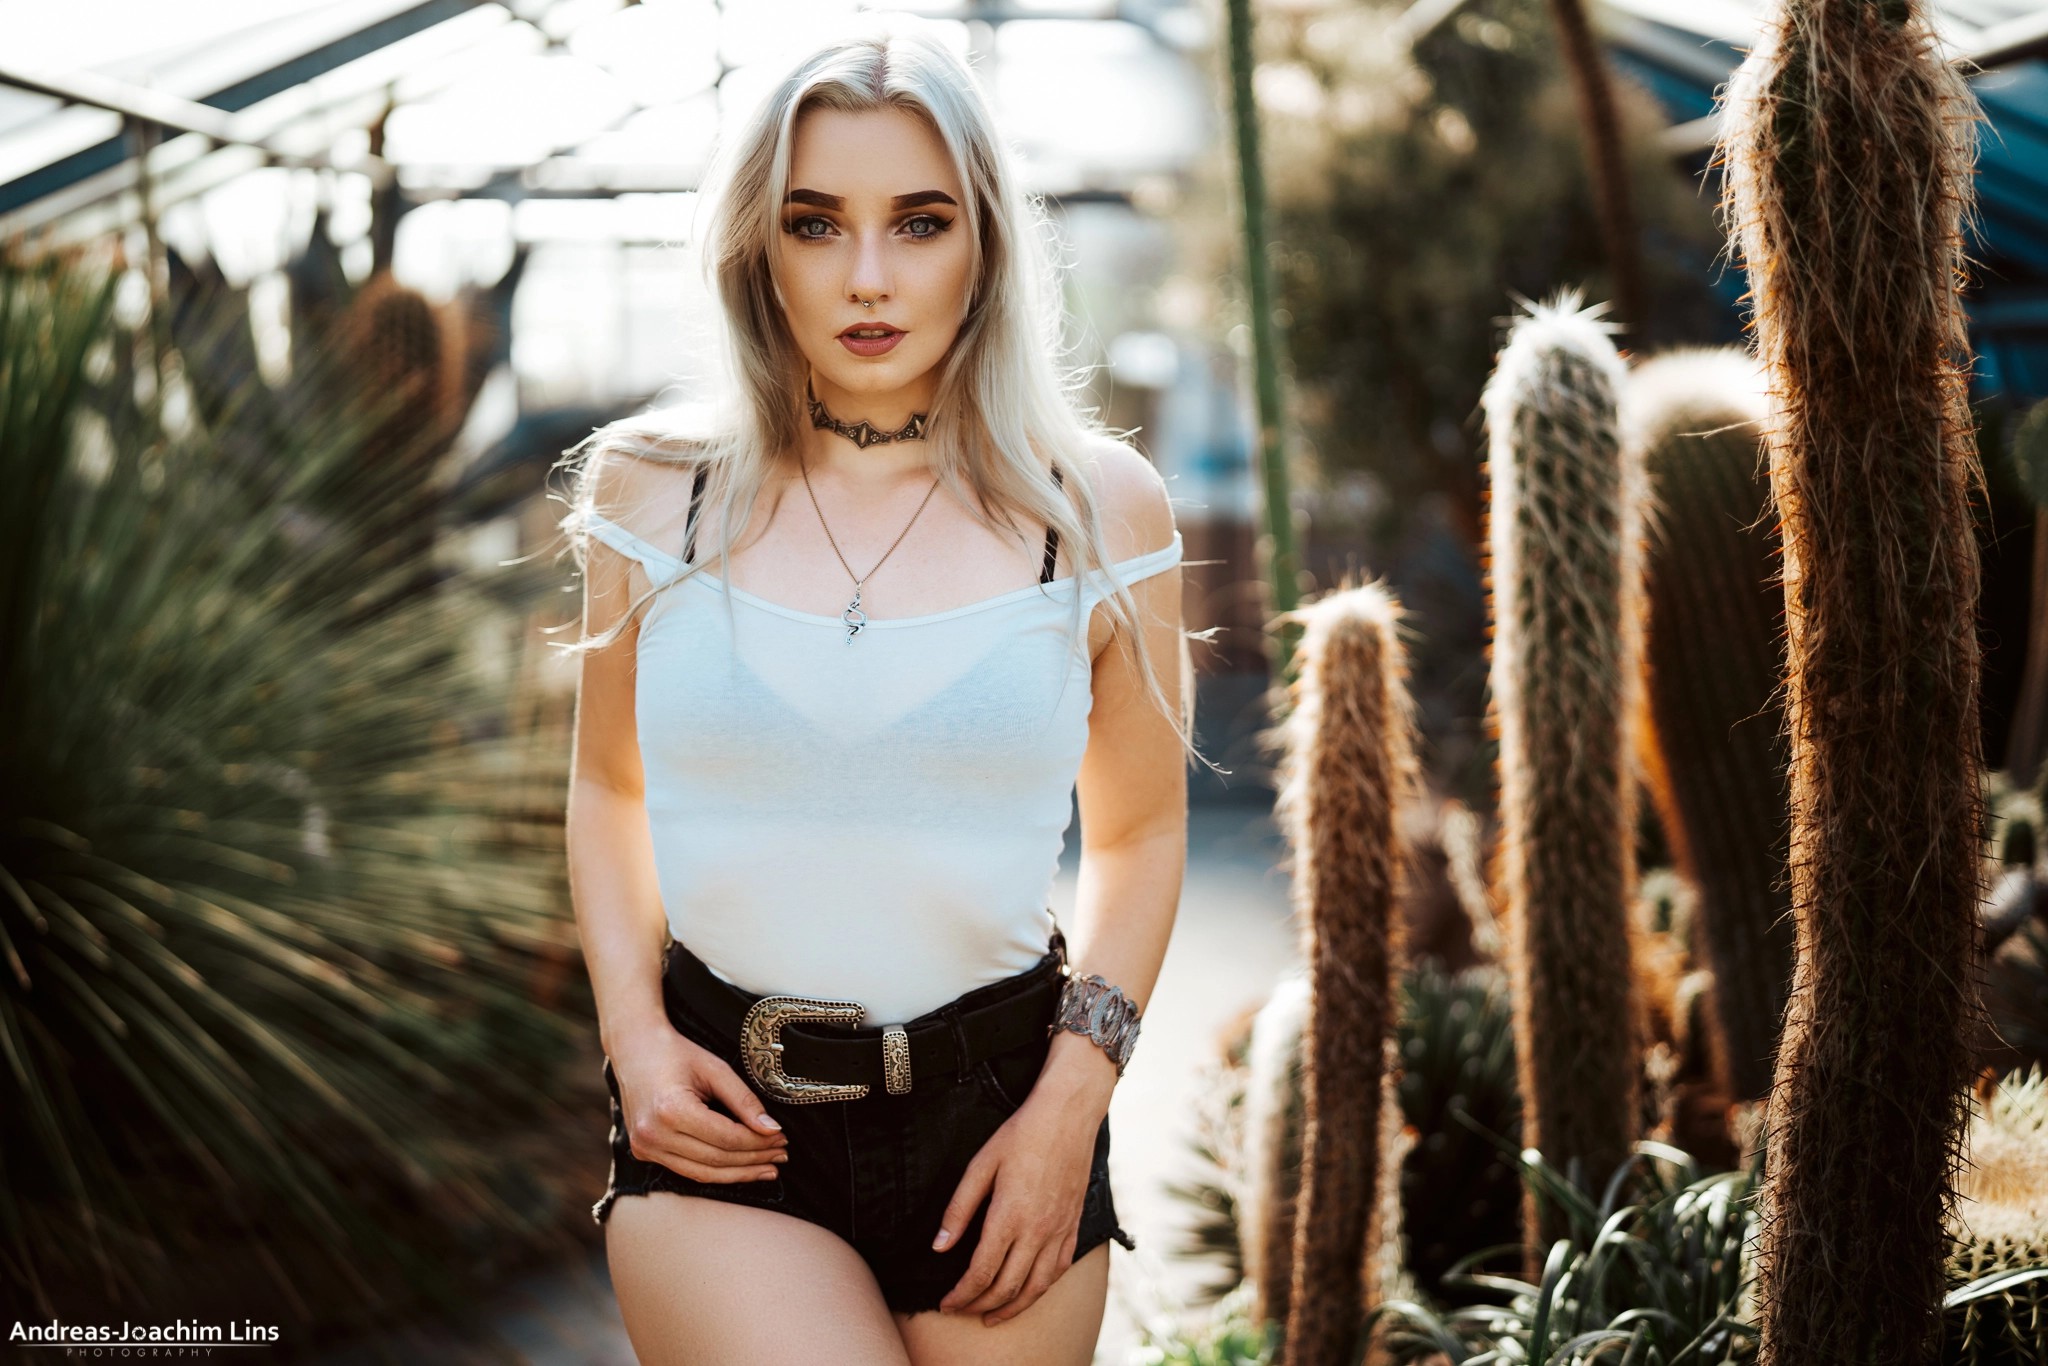 People 2048x1366 white tops bare shoulders blonde women outdoors photography necklace jean shorts looking at viewer depth of field women gray eyes piercing see-through clothing bokeh Andreas-Joachim Lins pierced septum Maike Shepherd